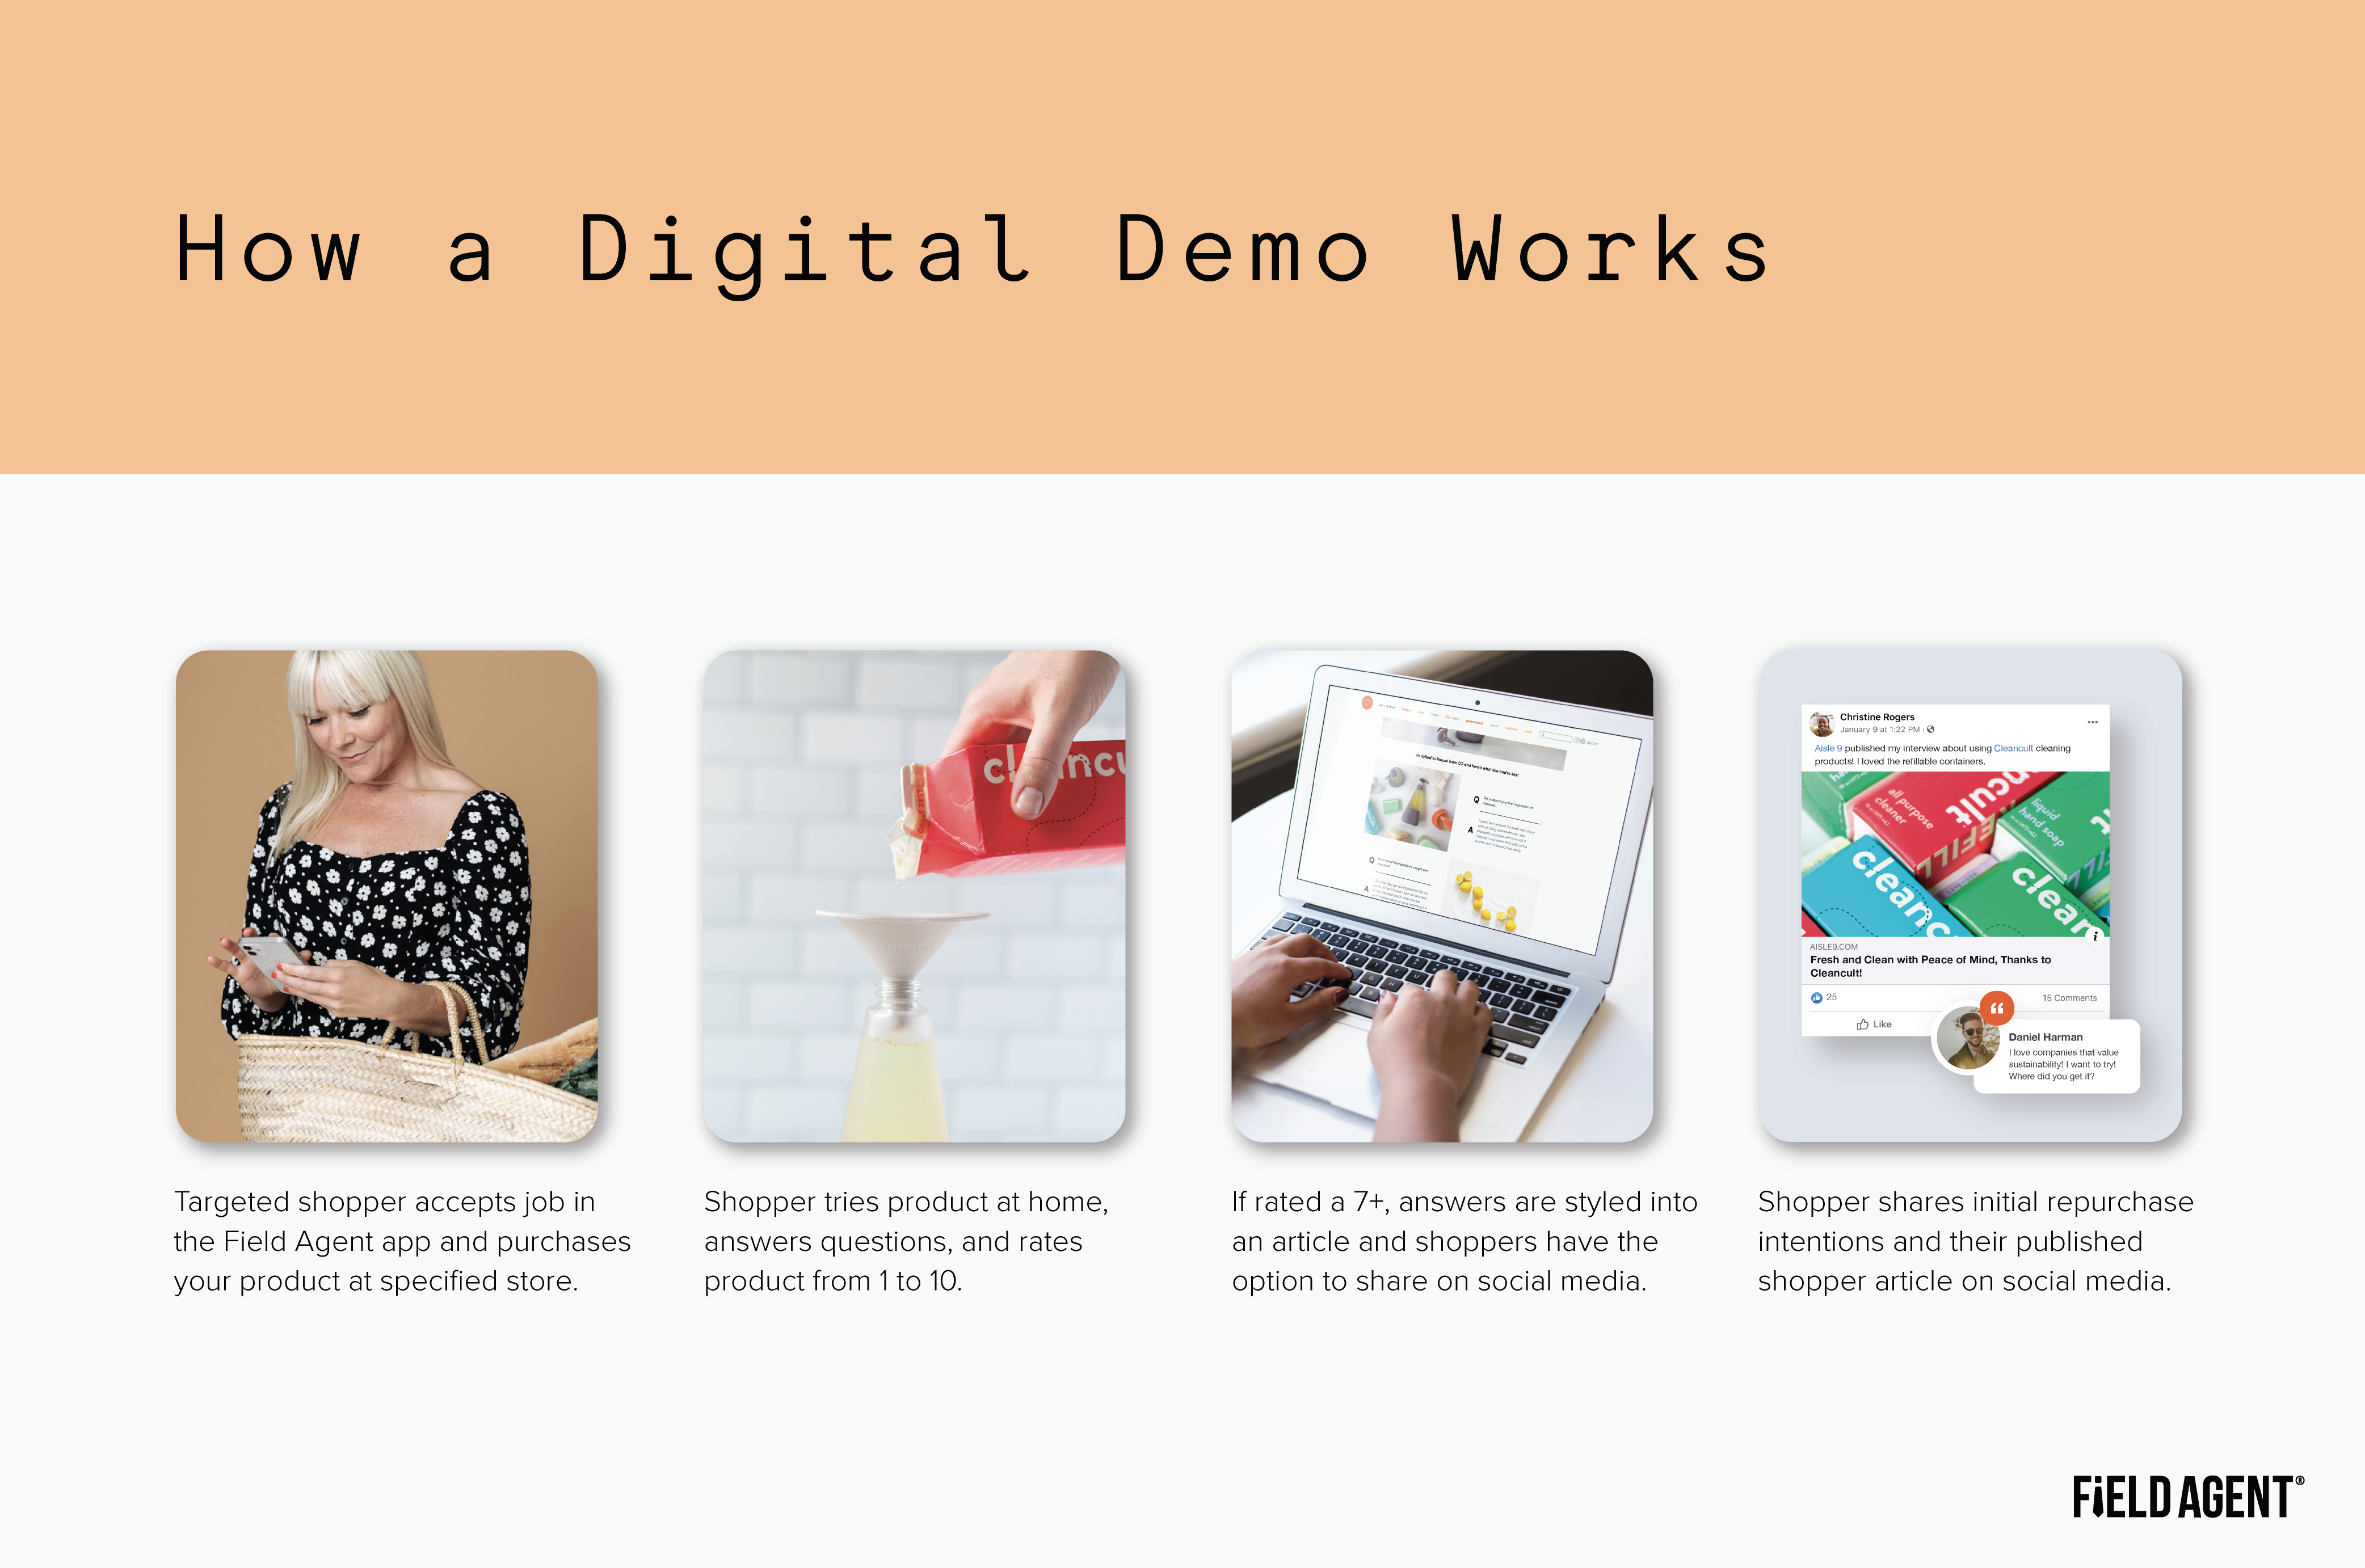 How does a Digital Demo work?